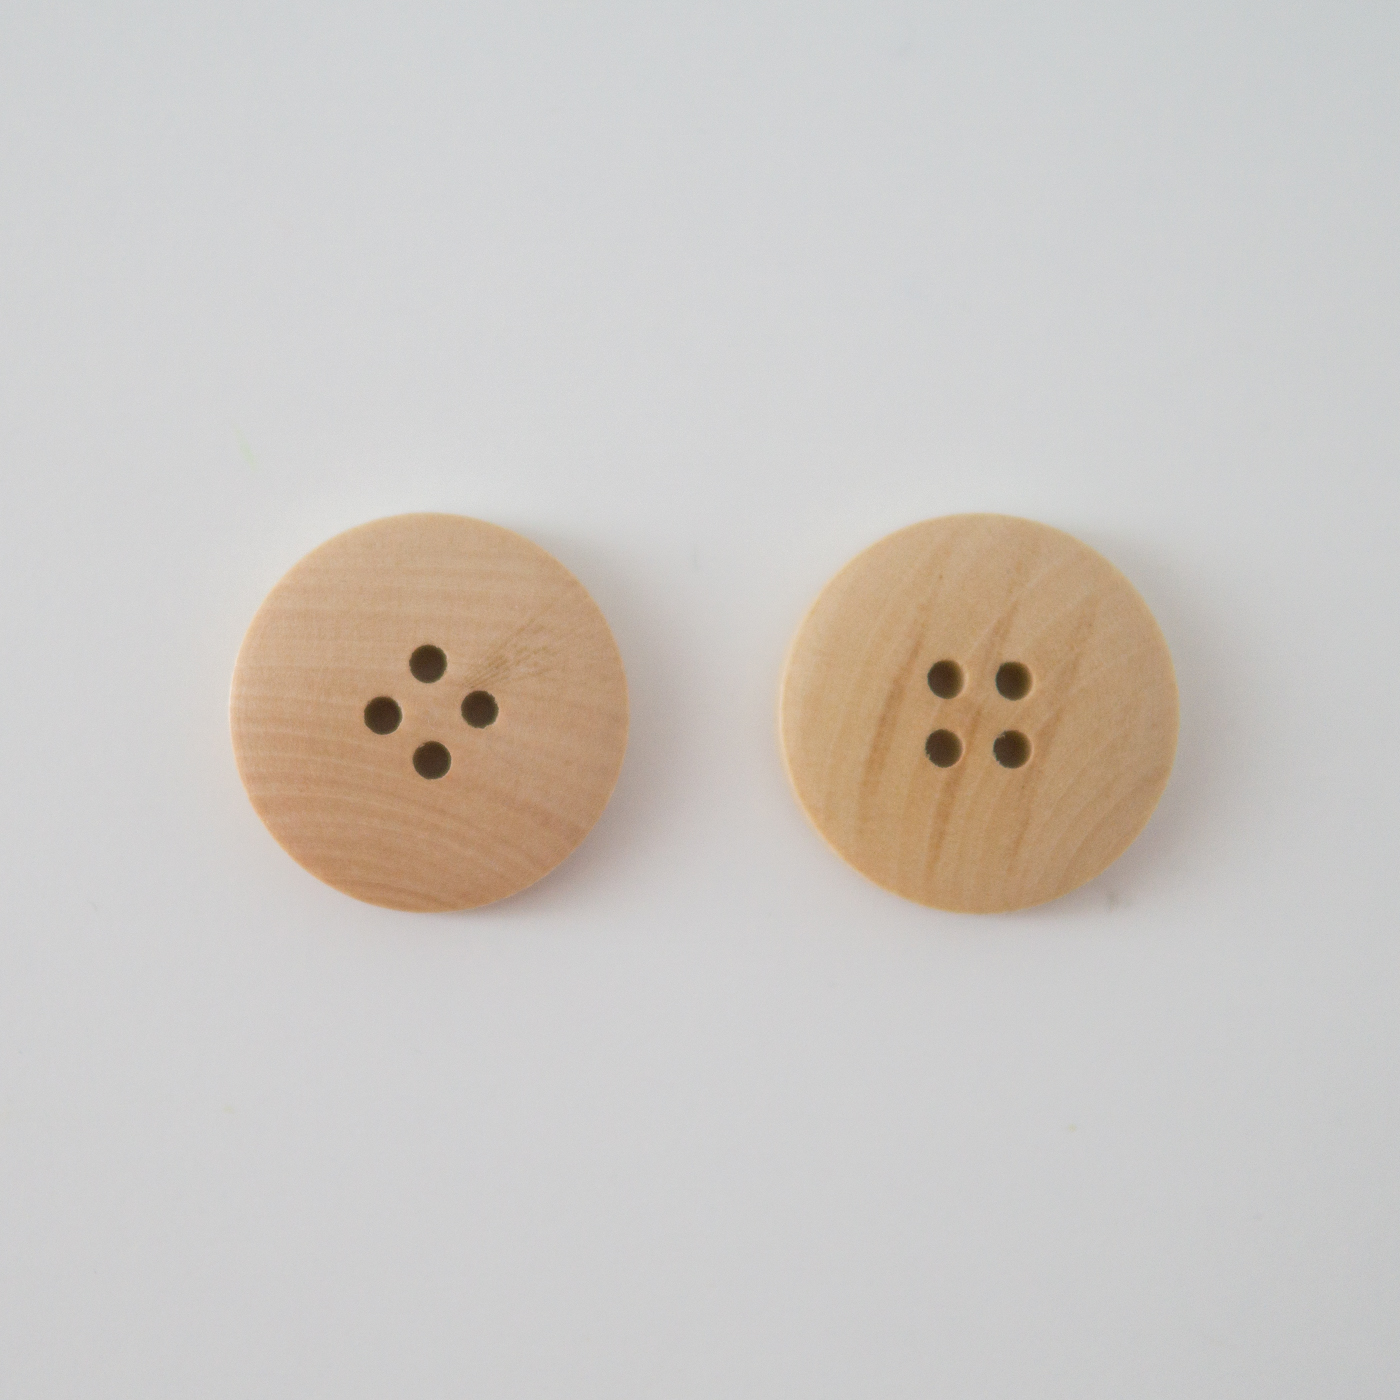 wood button - Wooden button | Natural light wood button knitting,18 mm - by HipKnitShop - 16/10/2018